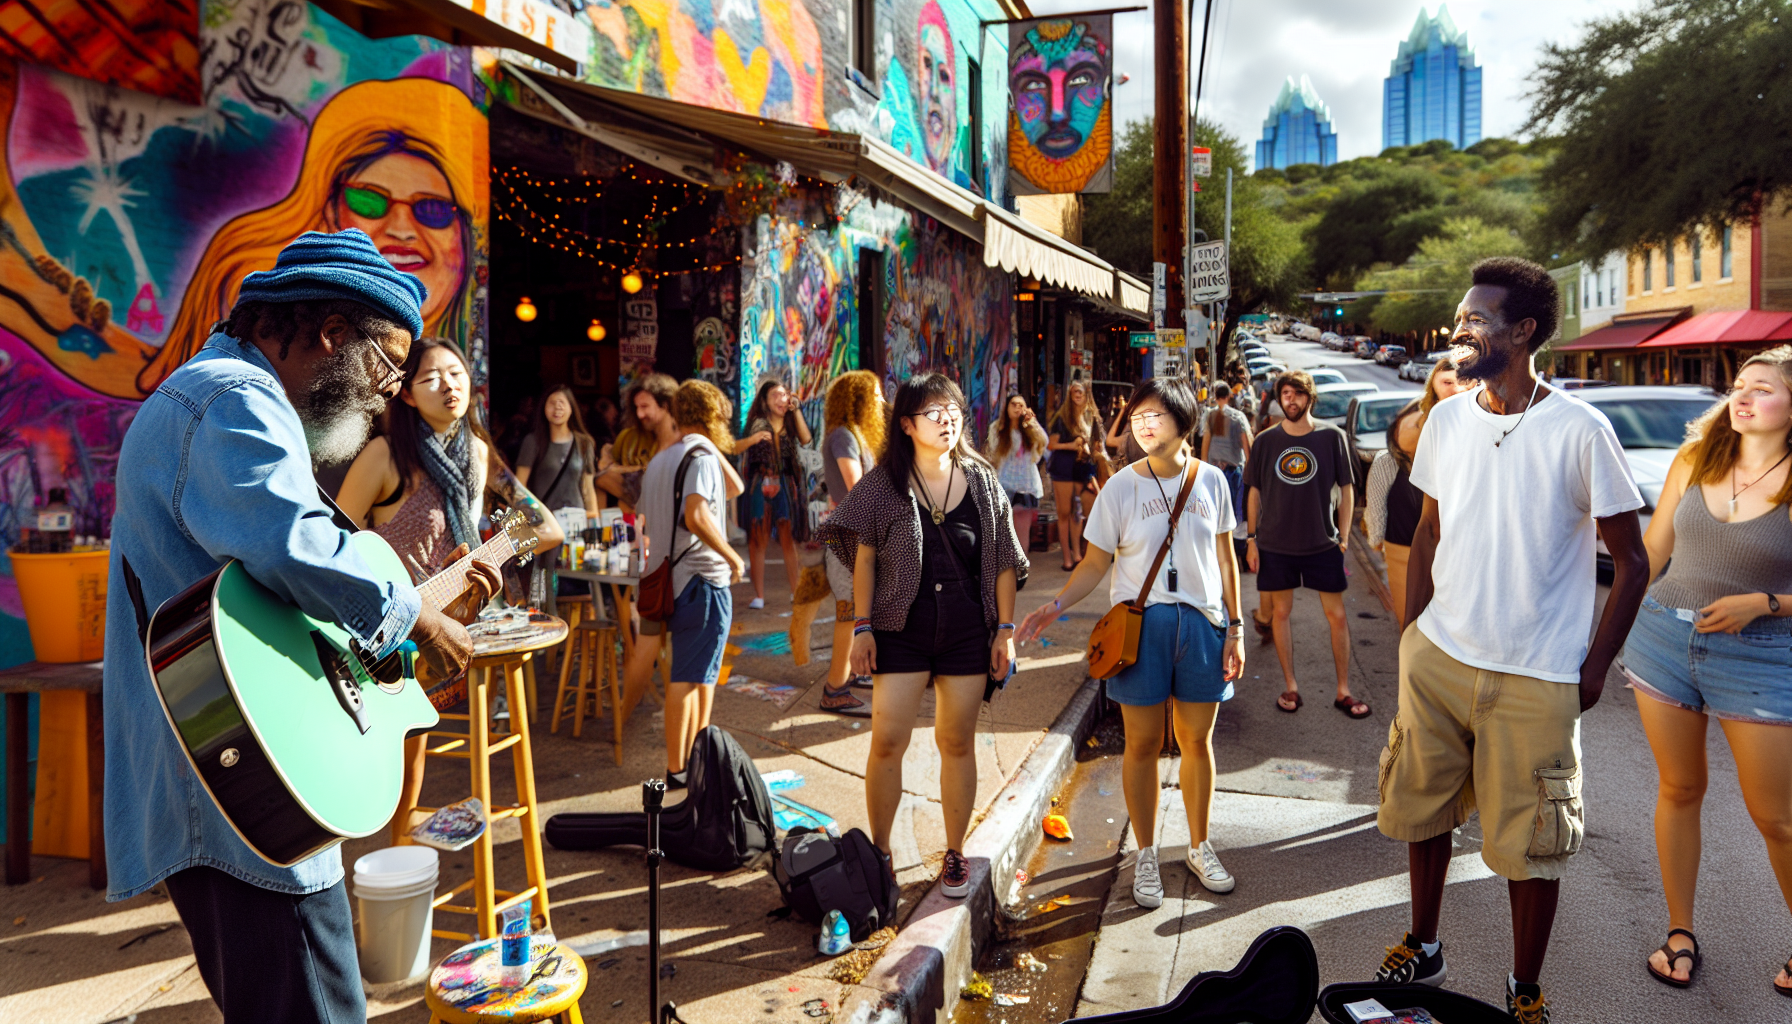 A vibrant street scene in Austin with live music and eclectic art, reminiscent of Seattle's charm merging with Austin weird